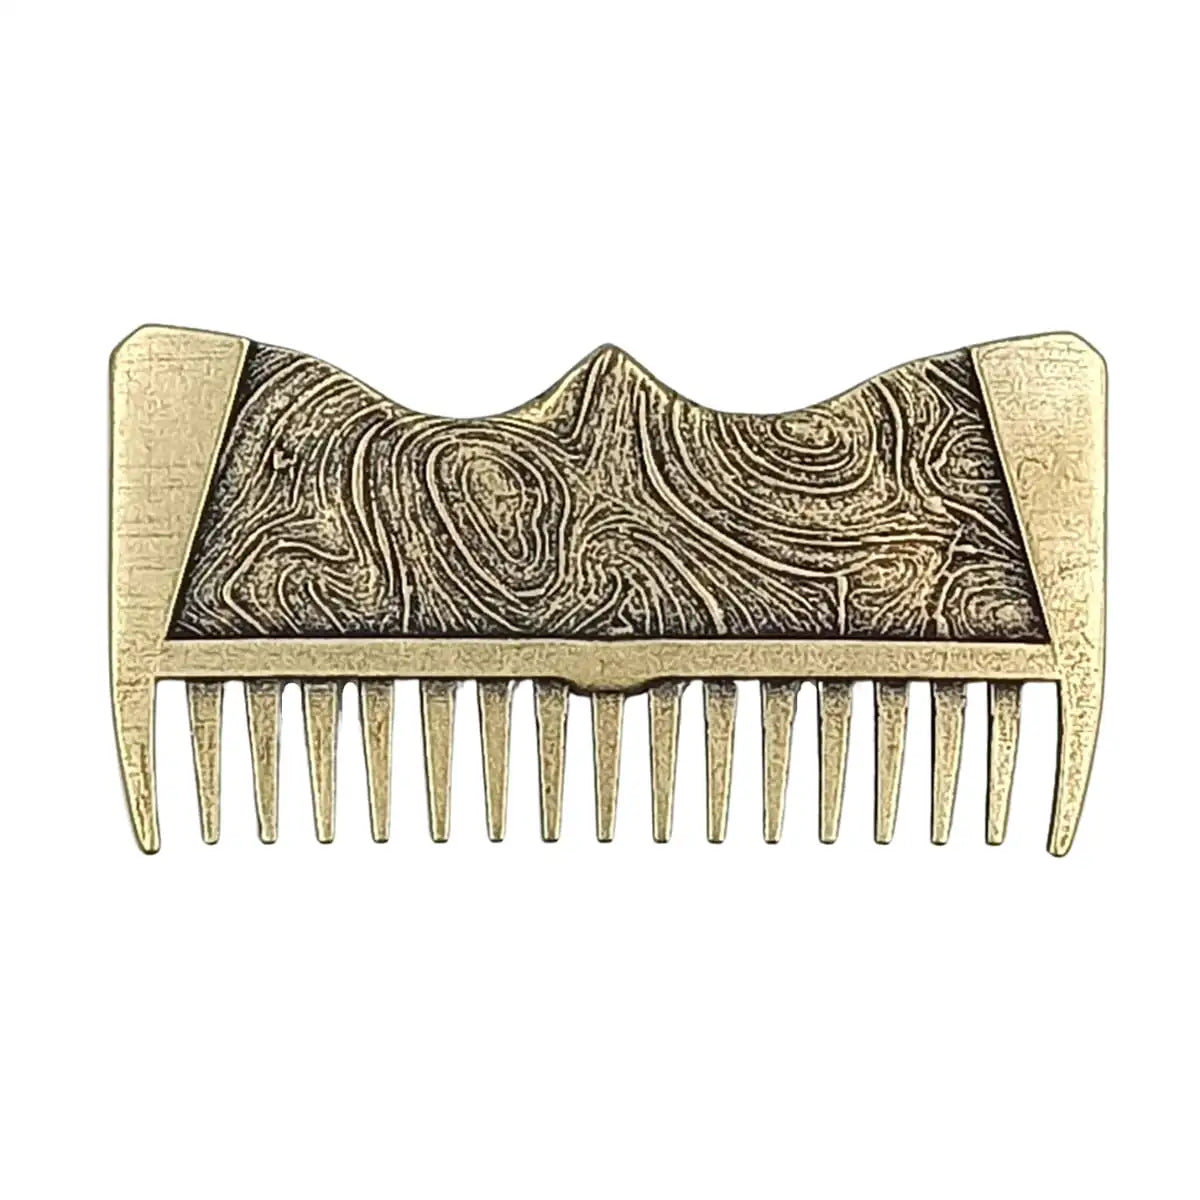 Odin carving viking beard comb hair care gifts for men – WikkedKnot jewelry